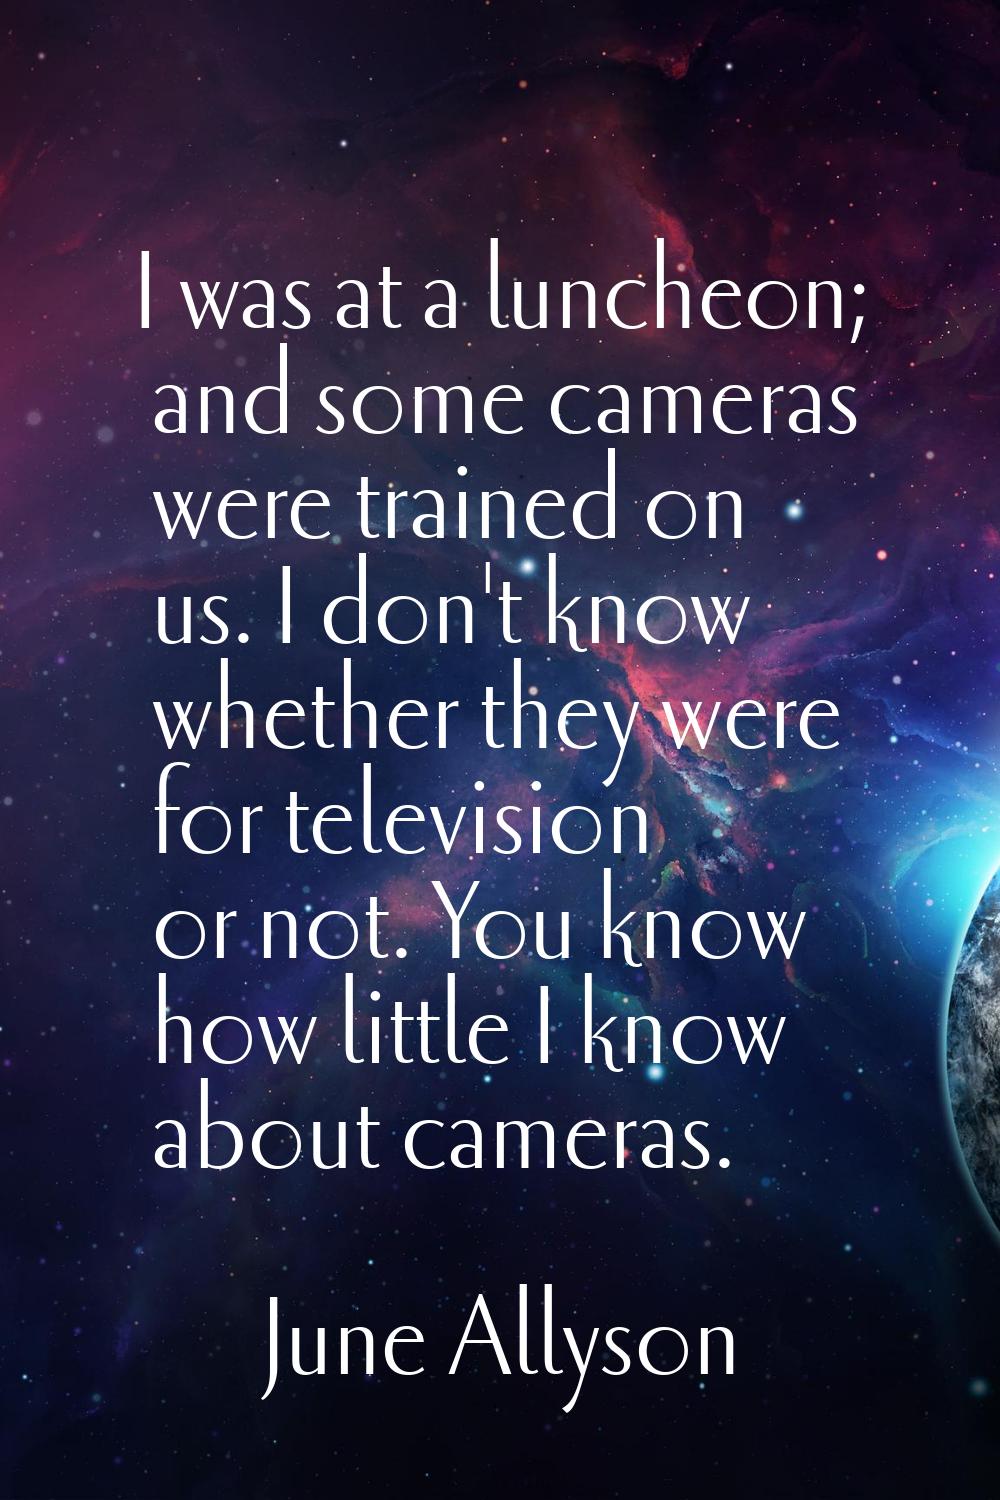 I was at a luncheon; and some cameras were trained on us. I don't know whether they were for televi